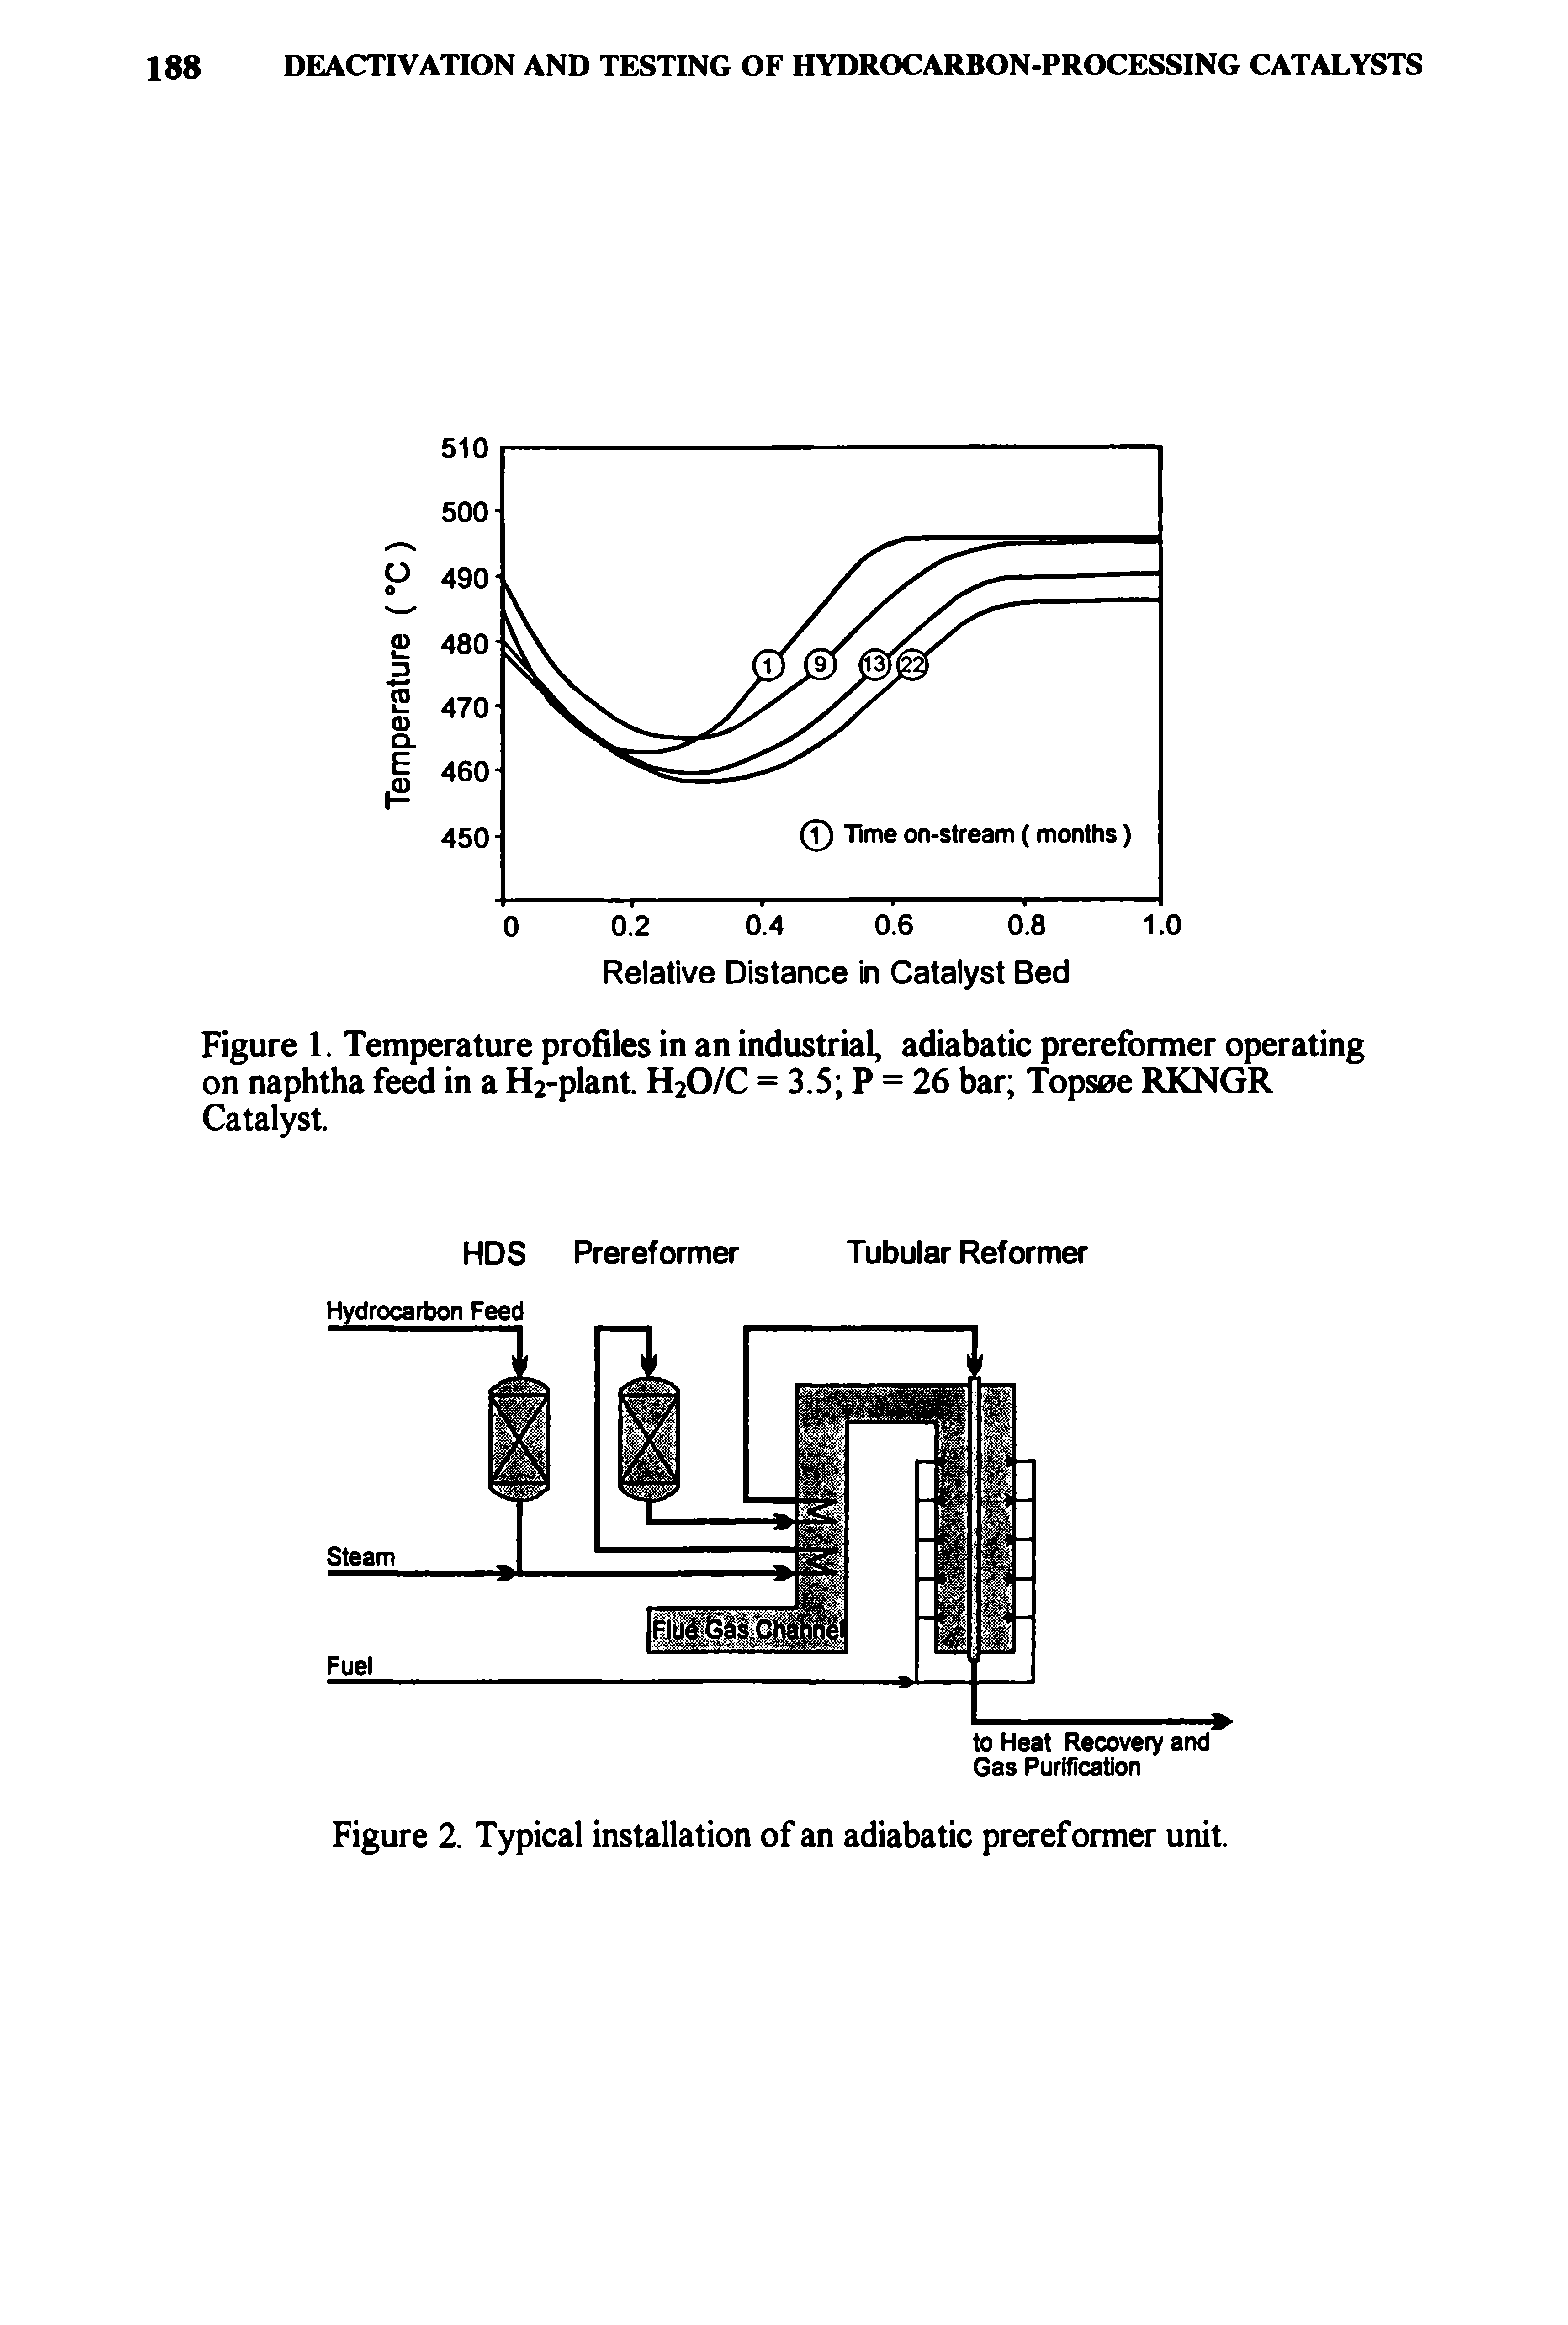 Figure 1. Temperature profiles in an industrial, adiabatic prereformer operating on naphtha feed in a H2-plant. H2O/C = 3.5 P = 26 bar Topsoe RKNGR Catalyst.